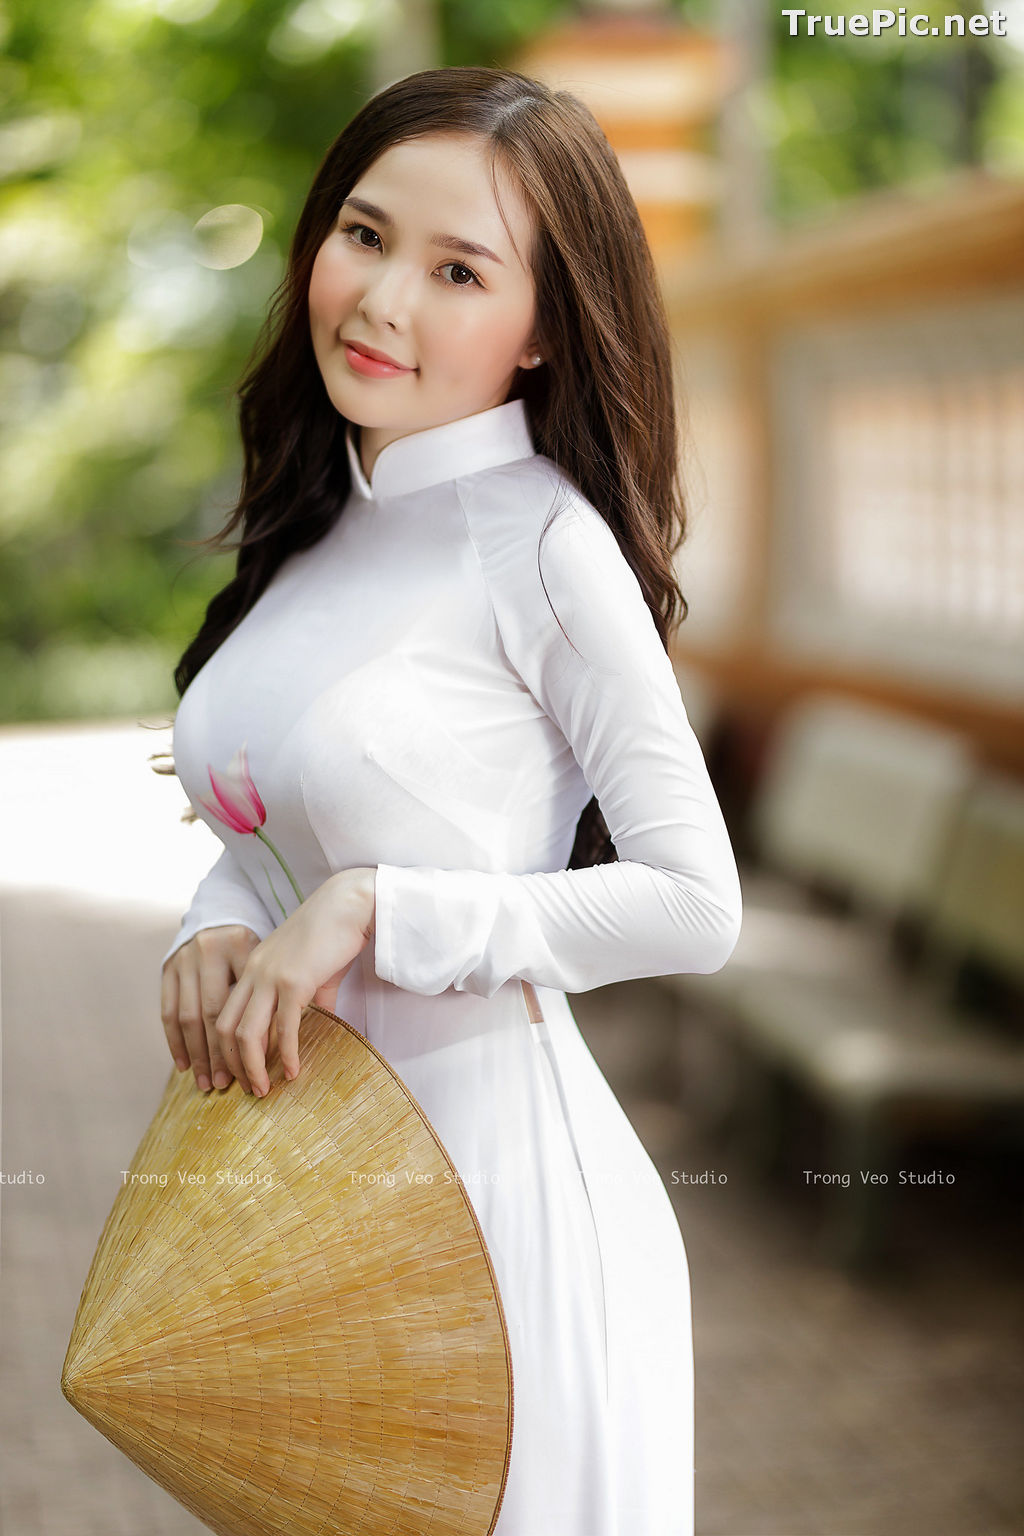 The Beauty of Vietnamese Girls with Traditional Dress (Ao Dai) #1